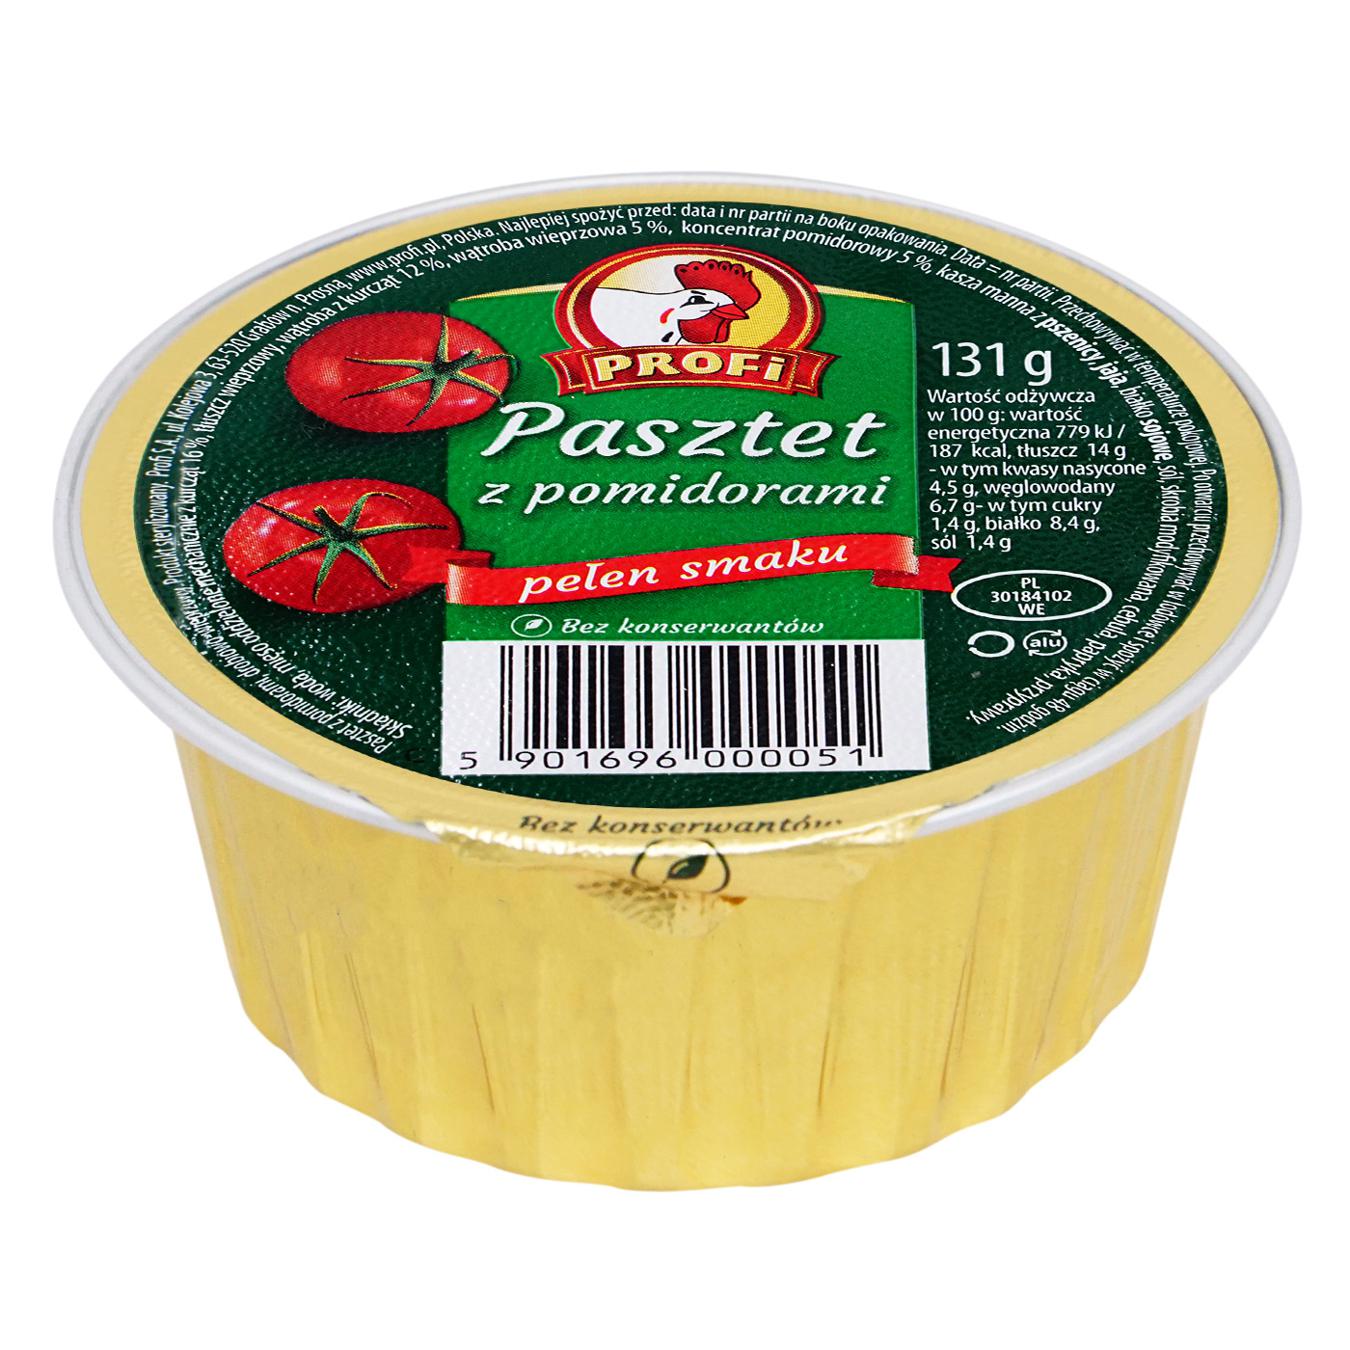 Profi pate with chicken, pork and tomatoes 131g